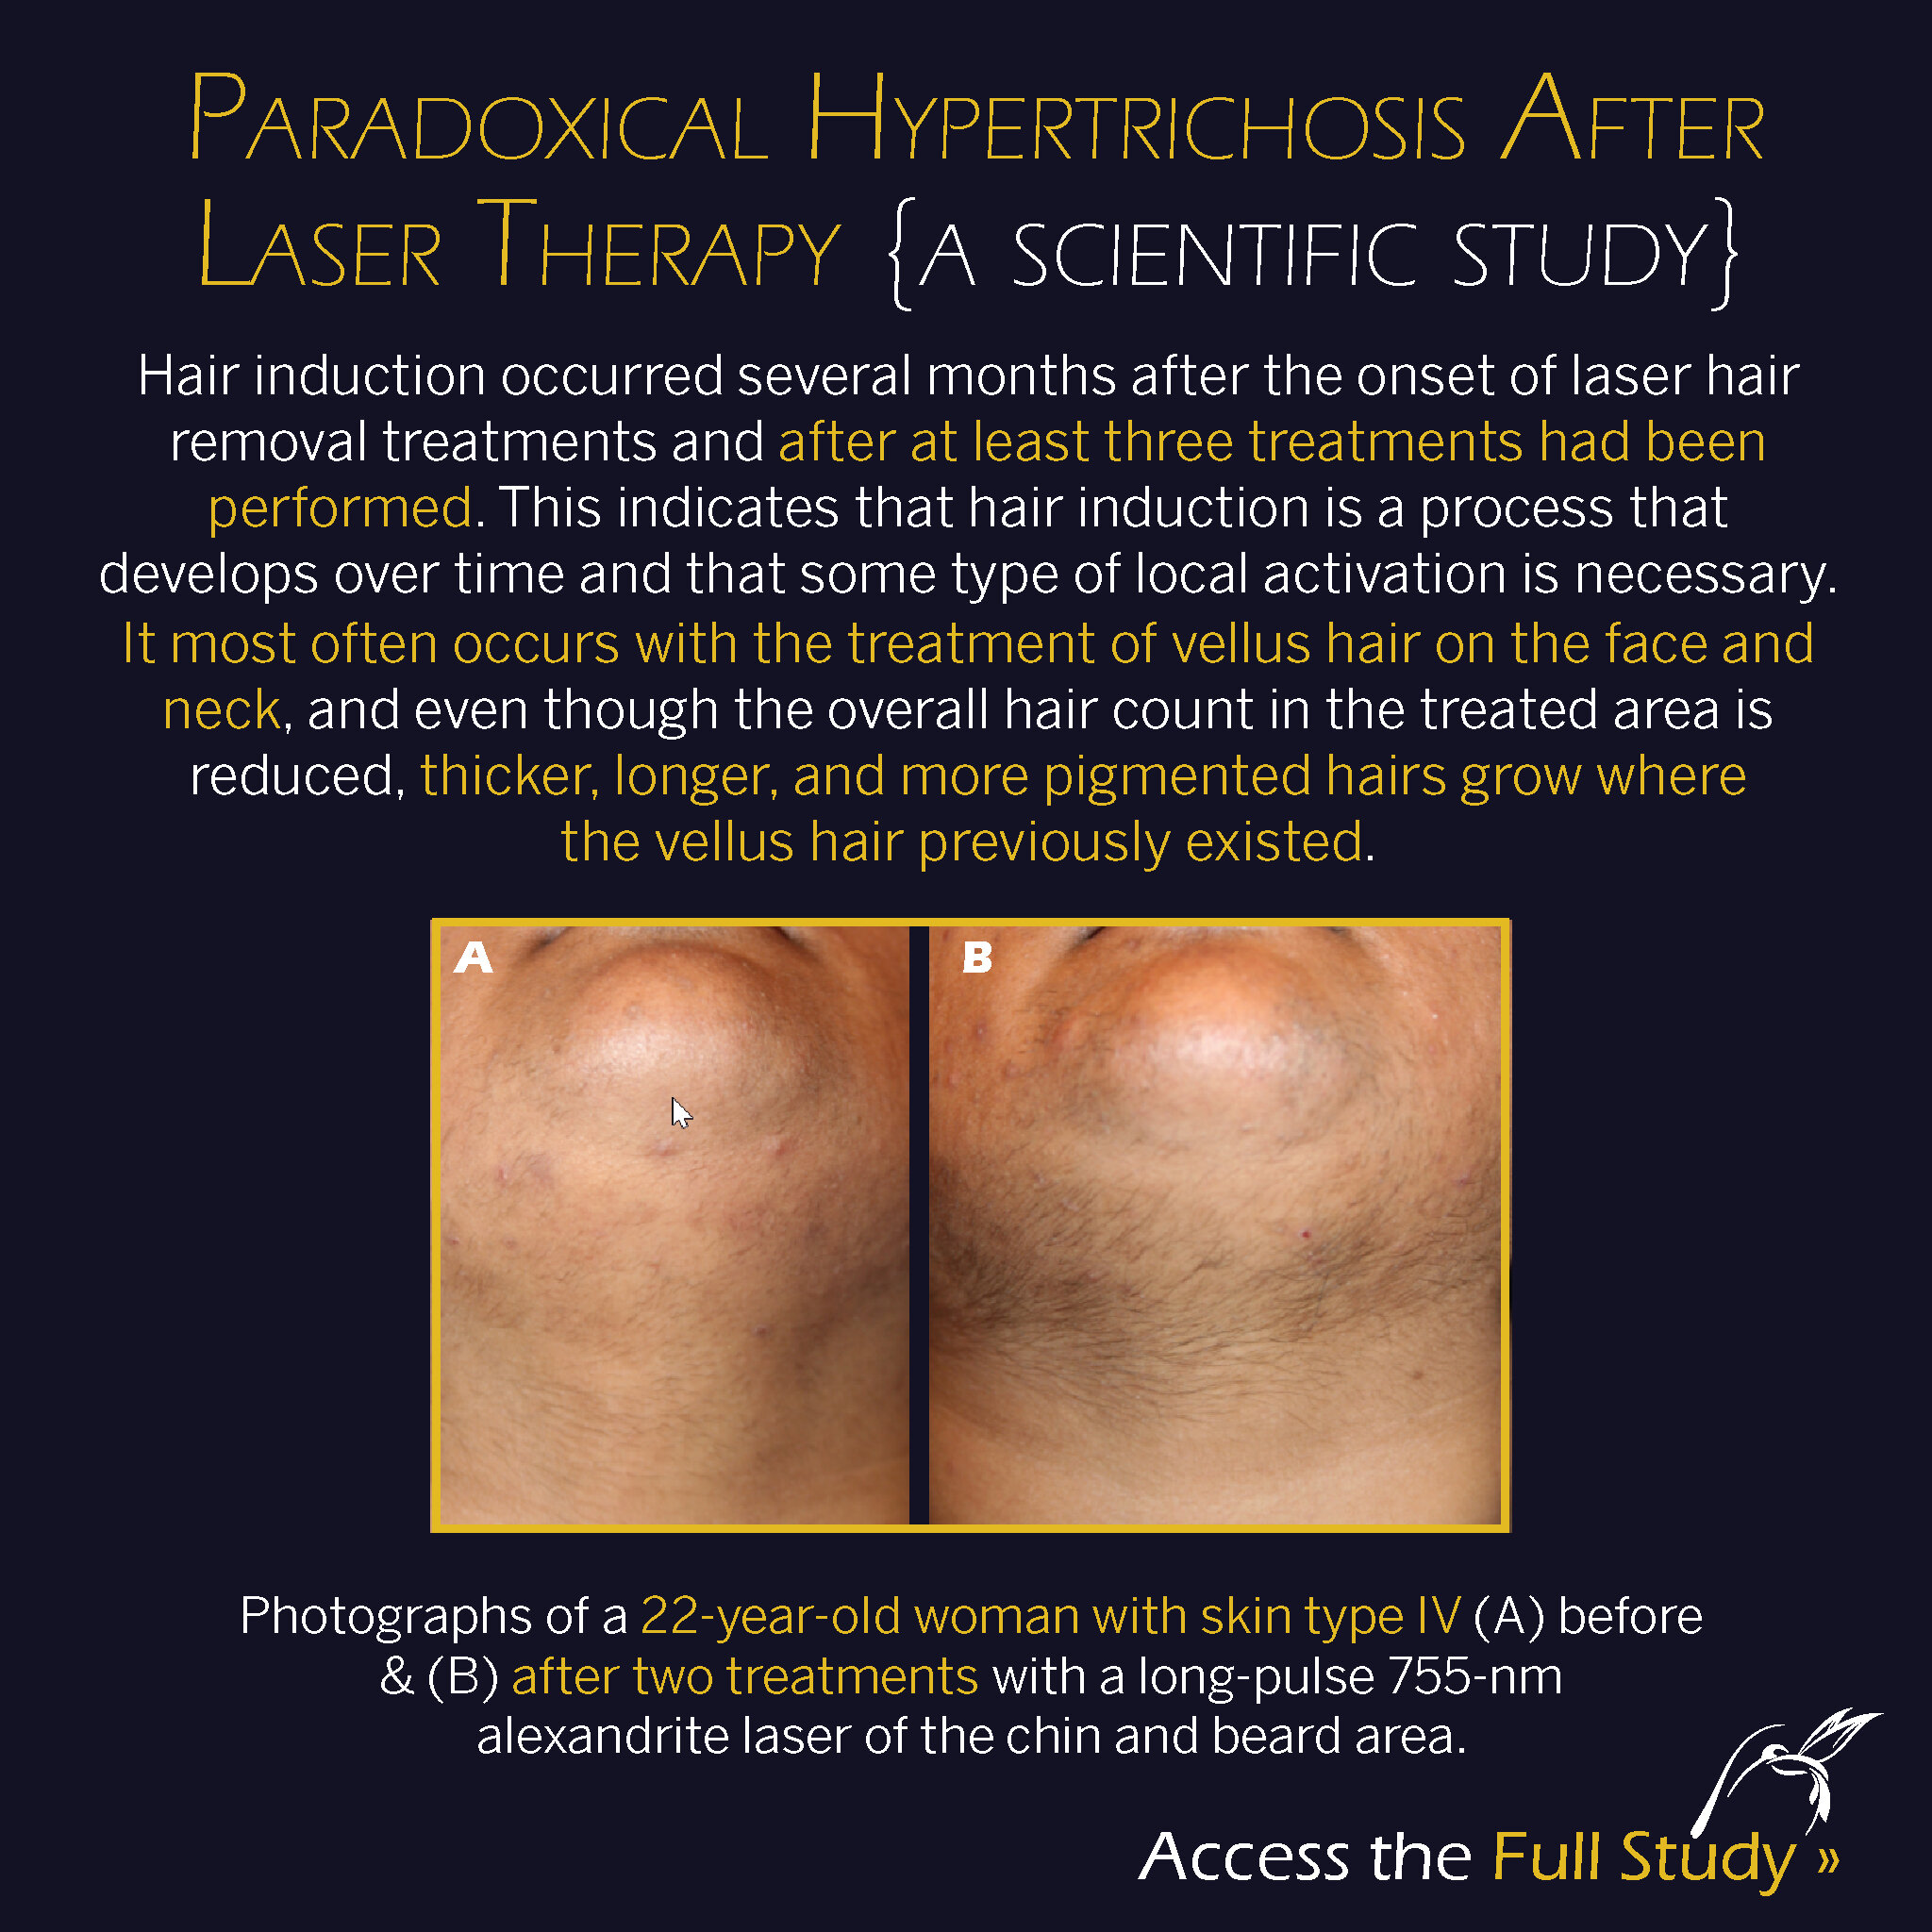 Paradoxical Hypertrichosis After Laser Therapy {A scientific study}